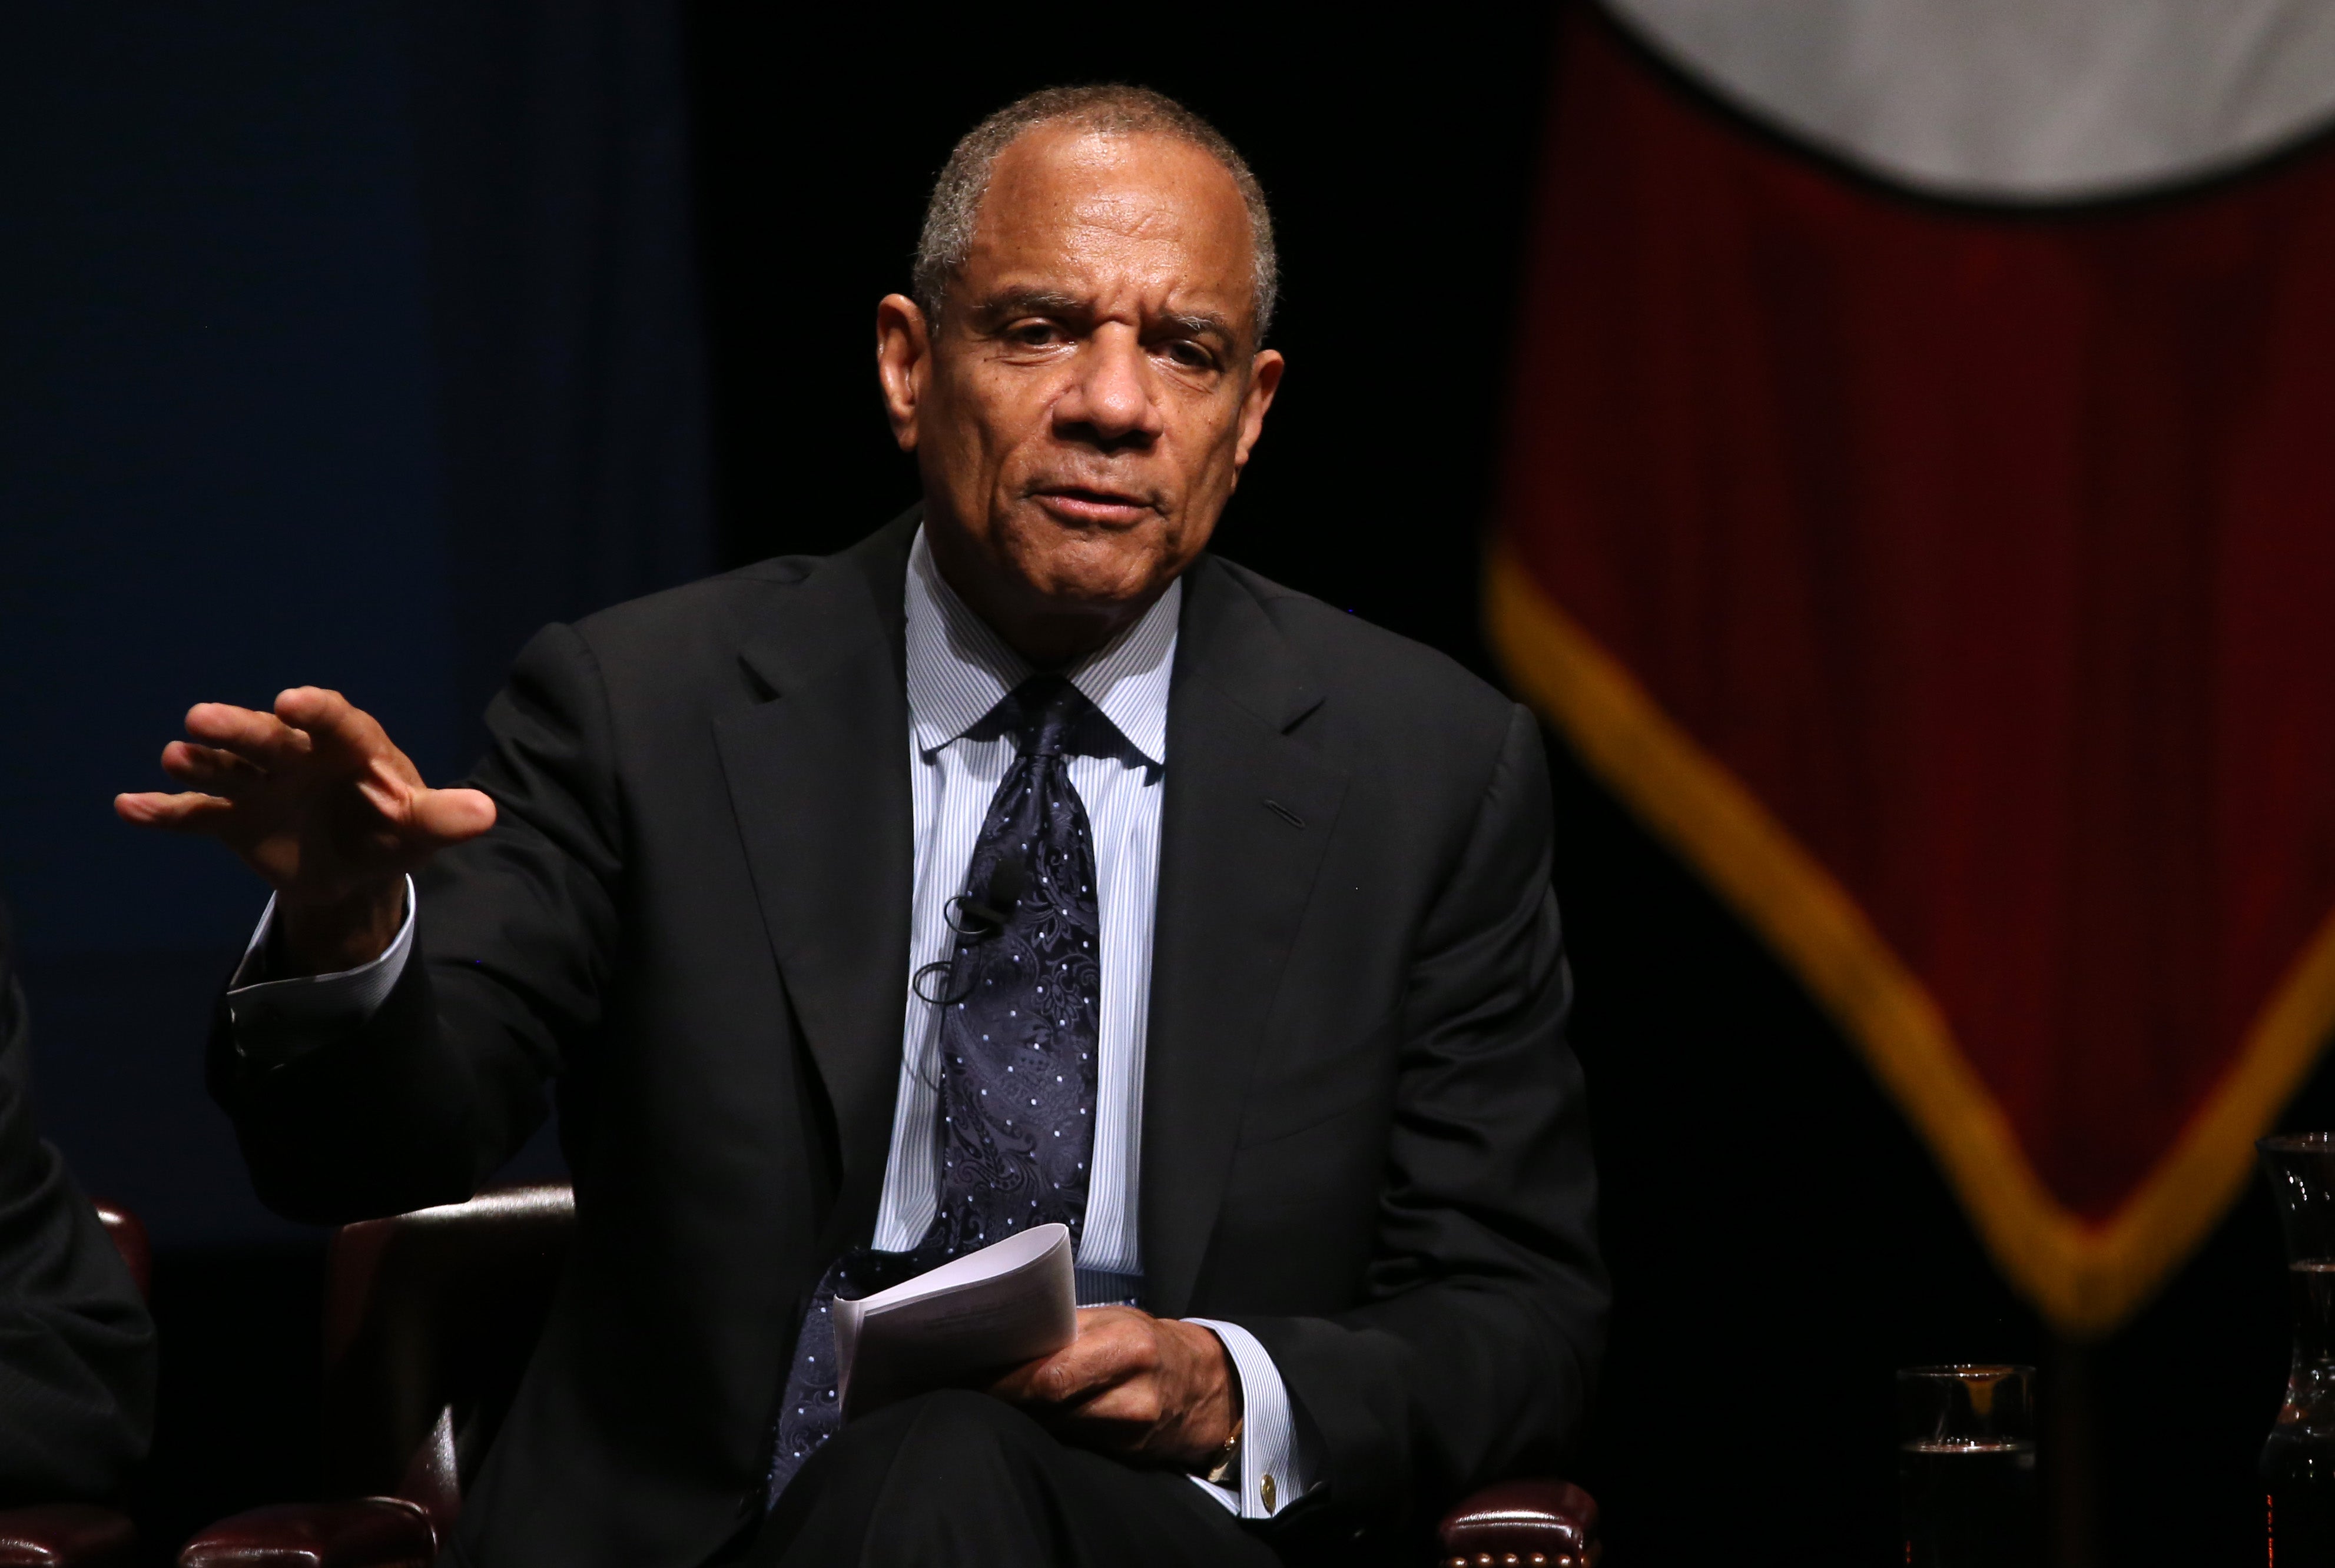 File image: Kenneth Chenault, the former chief executive of American Express was one of the business leaders to lead the zoom call insisting on a push back against proposed voting bills